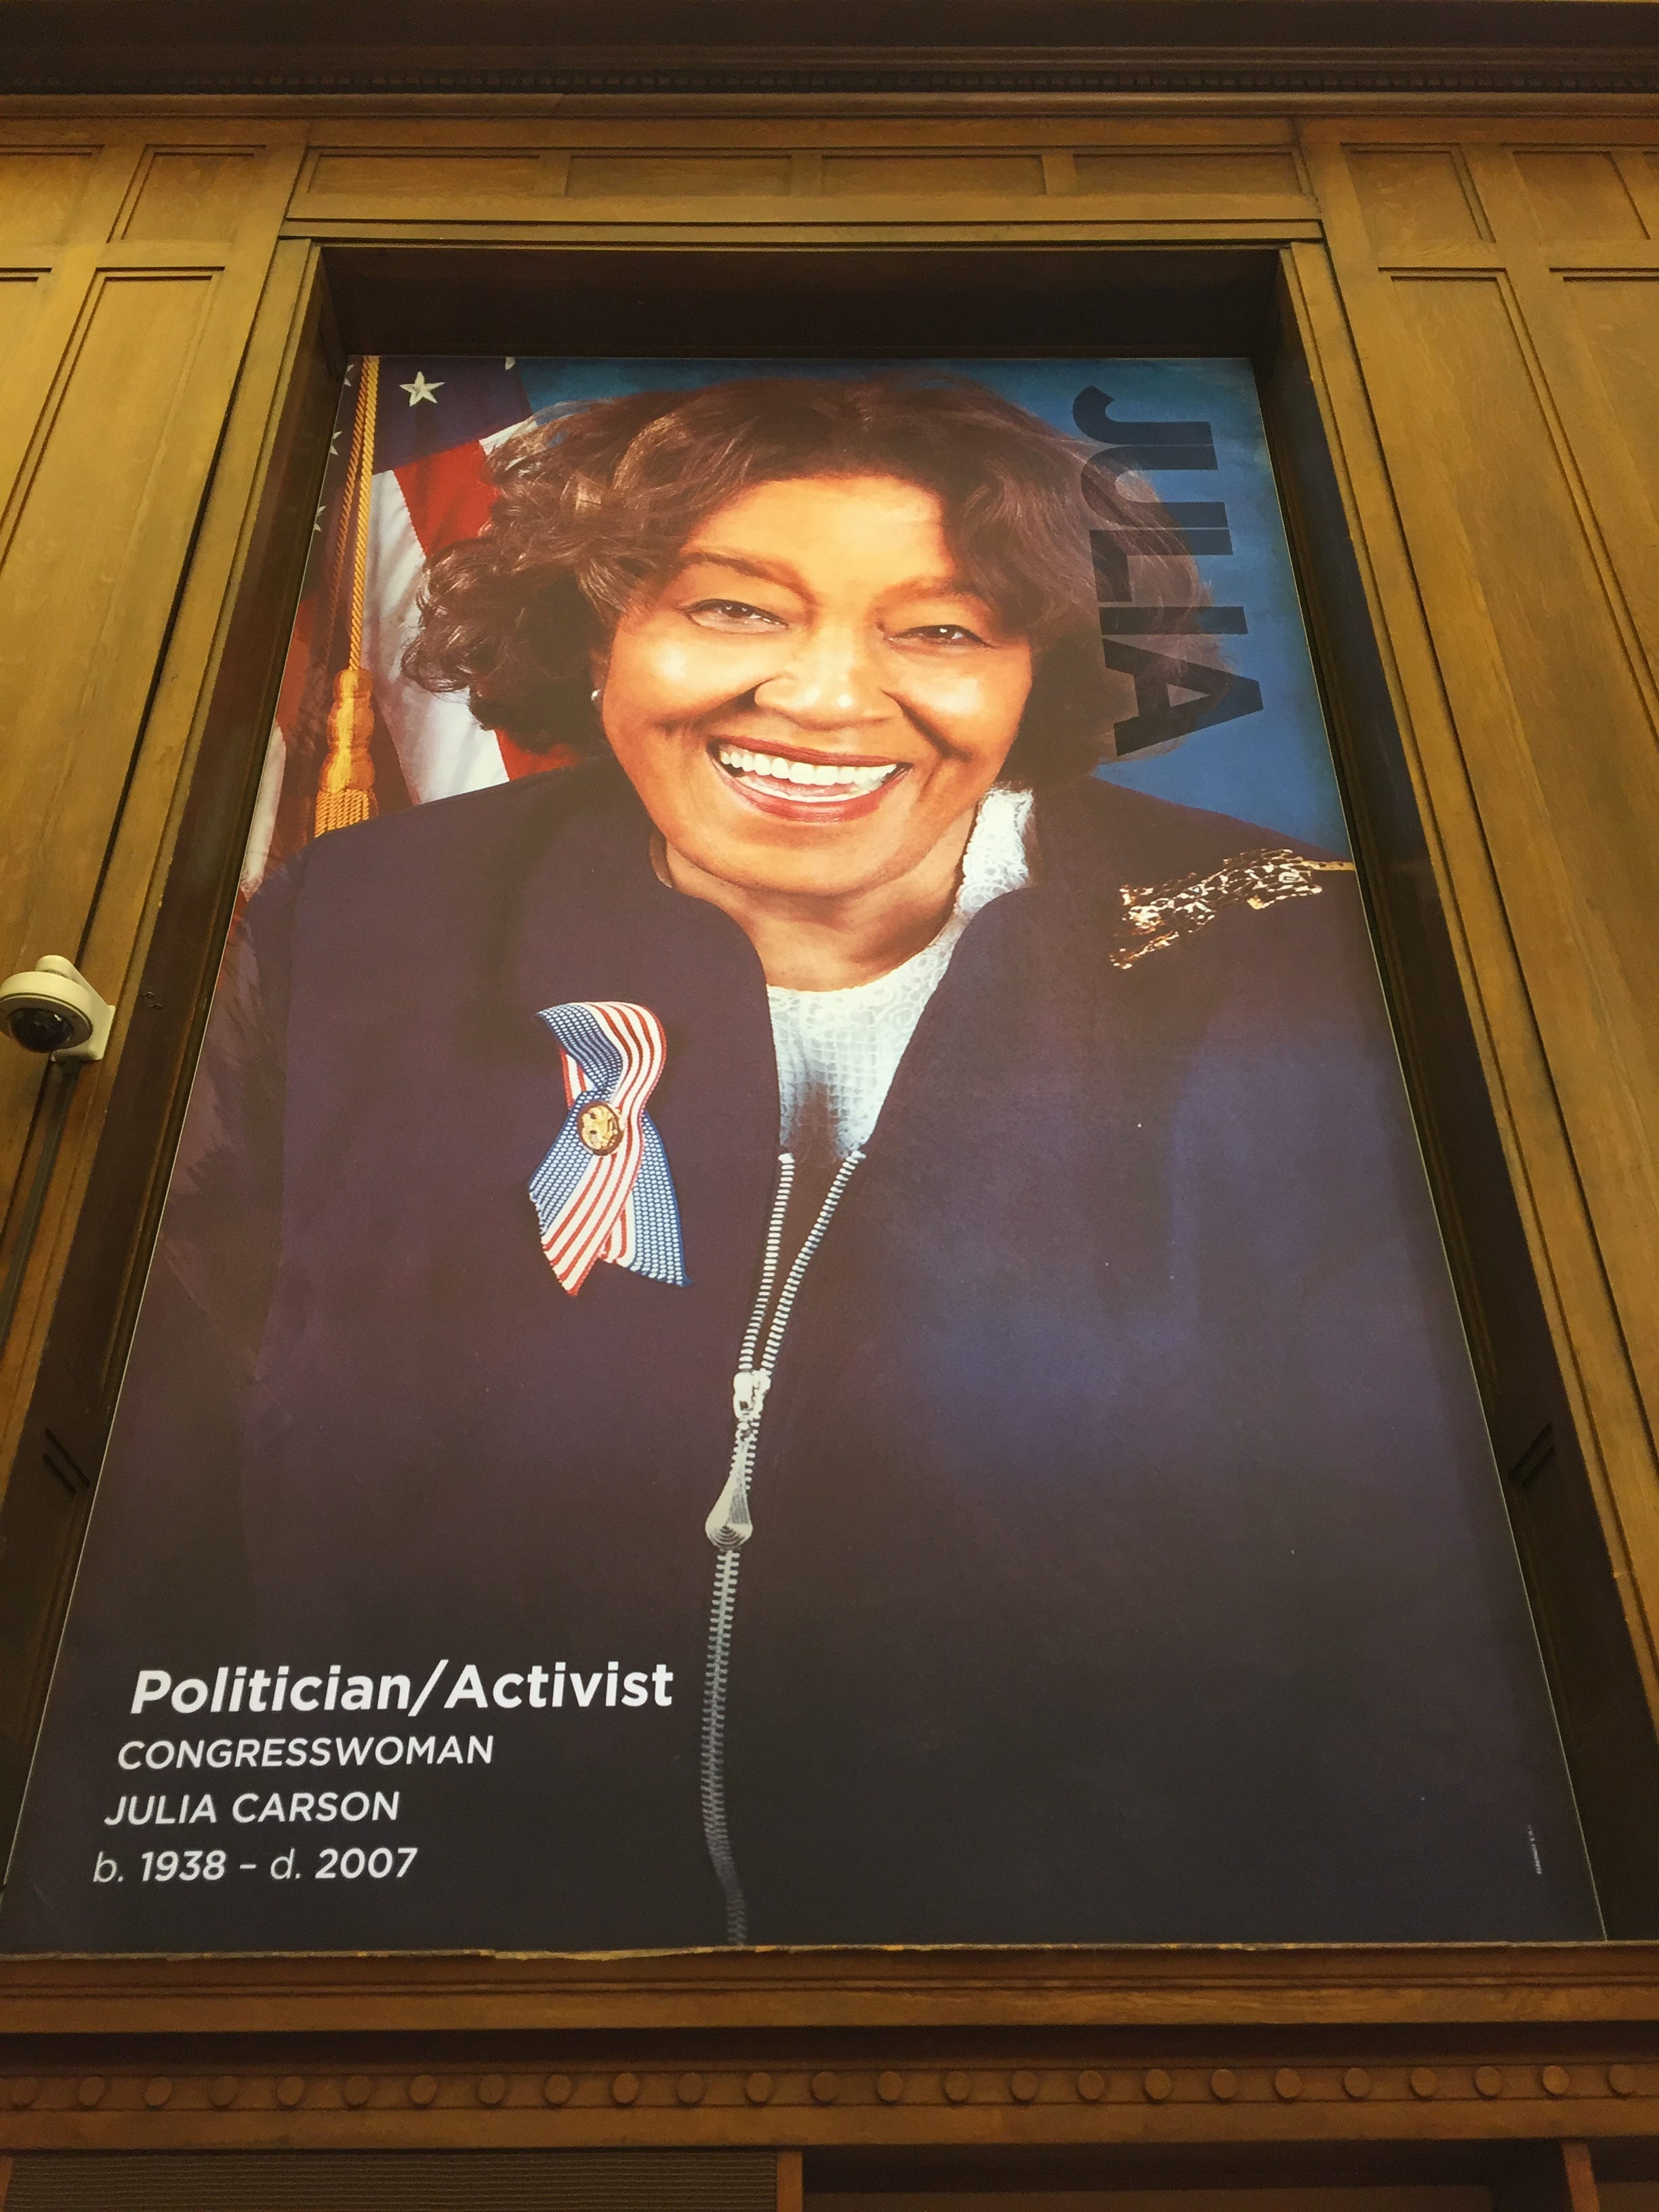 Who are the icons in the windows of Central Library&apos;s new black literature and culture center?